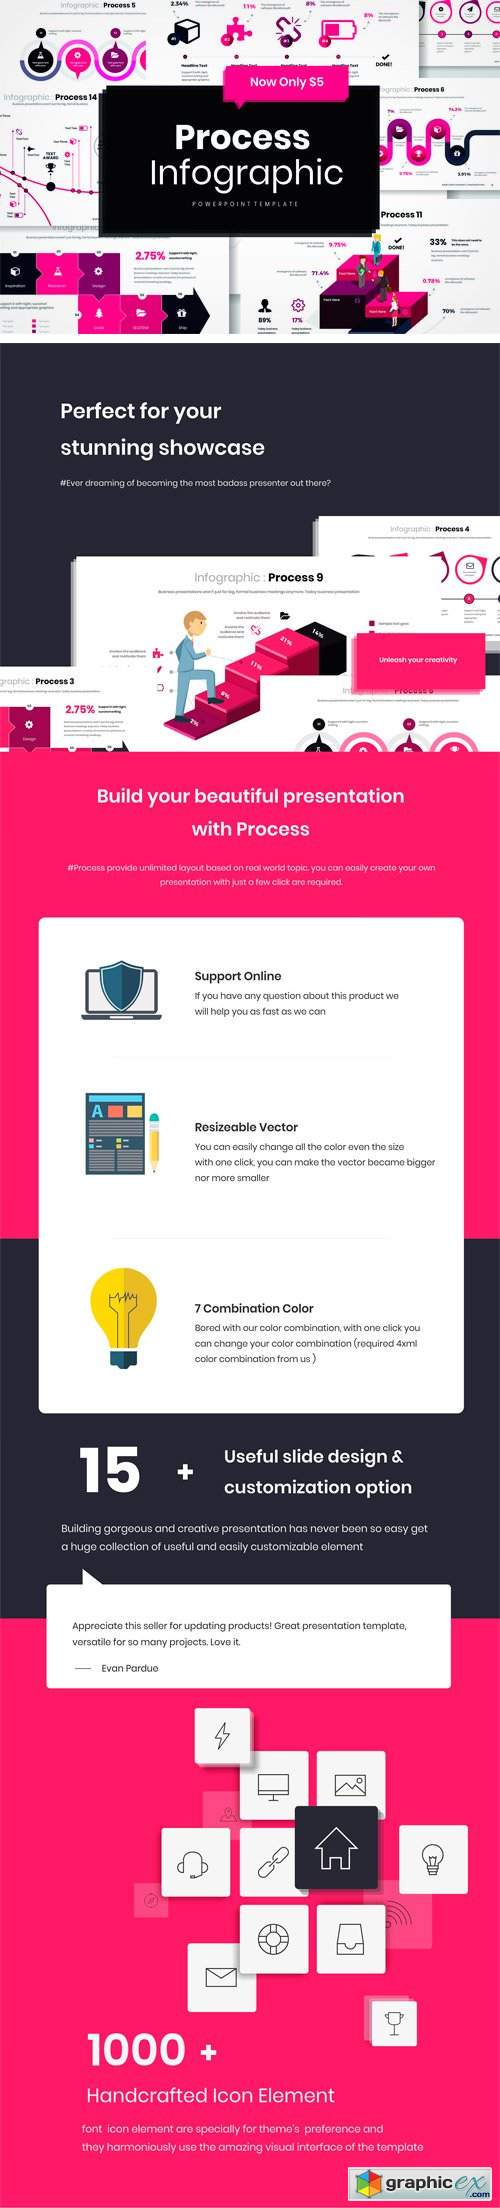 Process Infographic PowerPoint